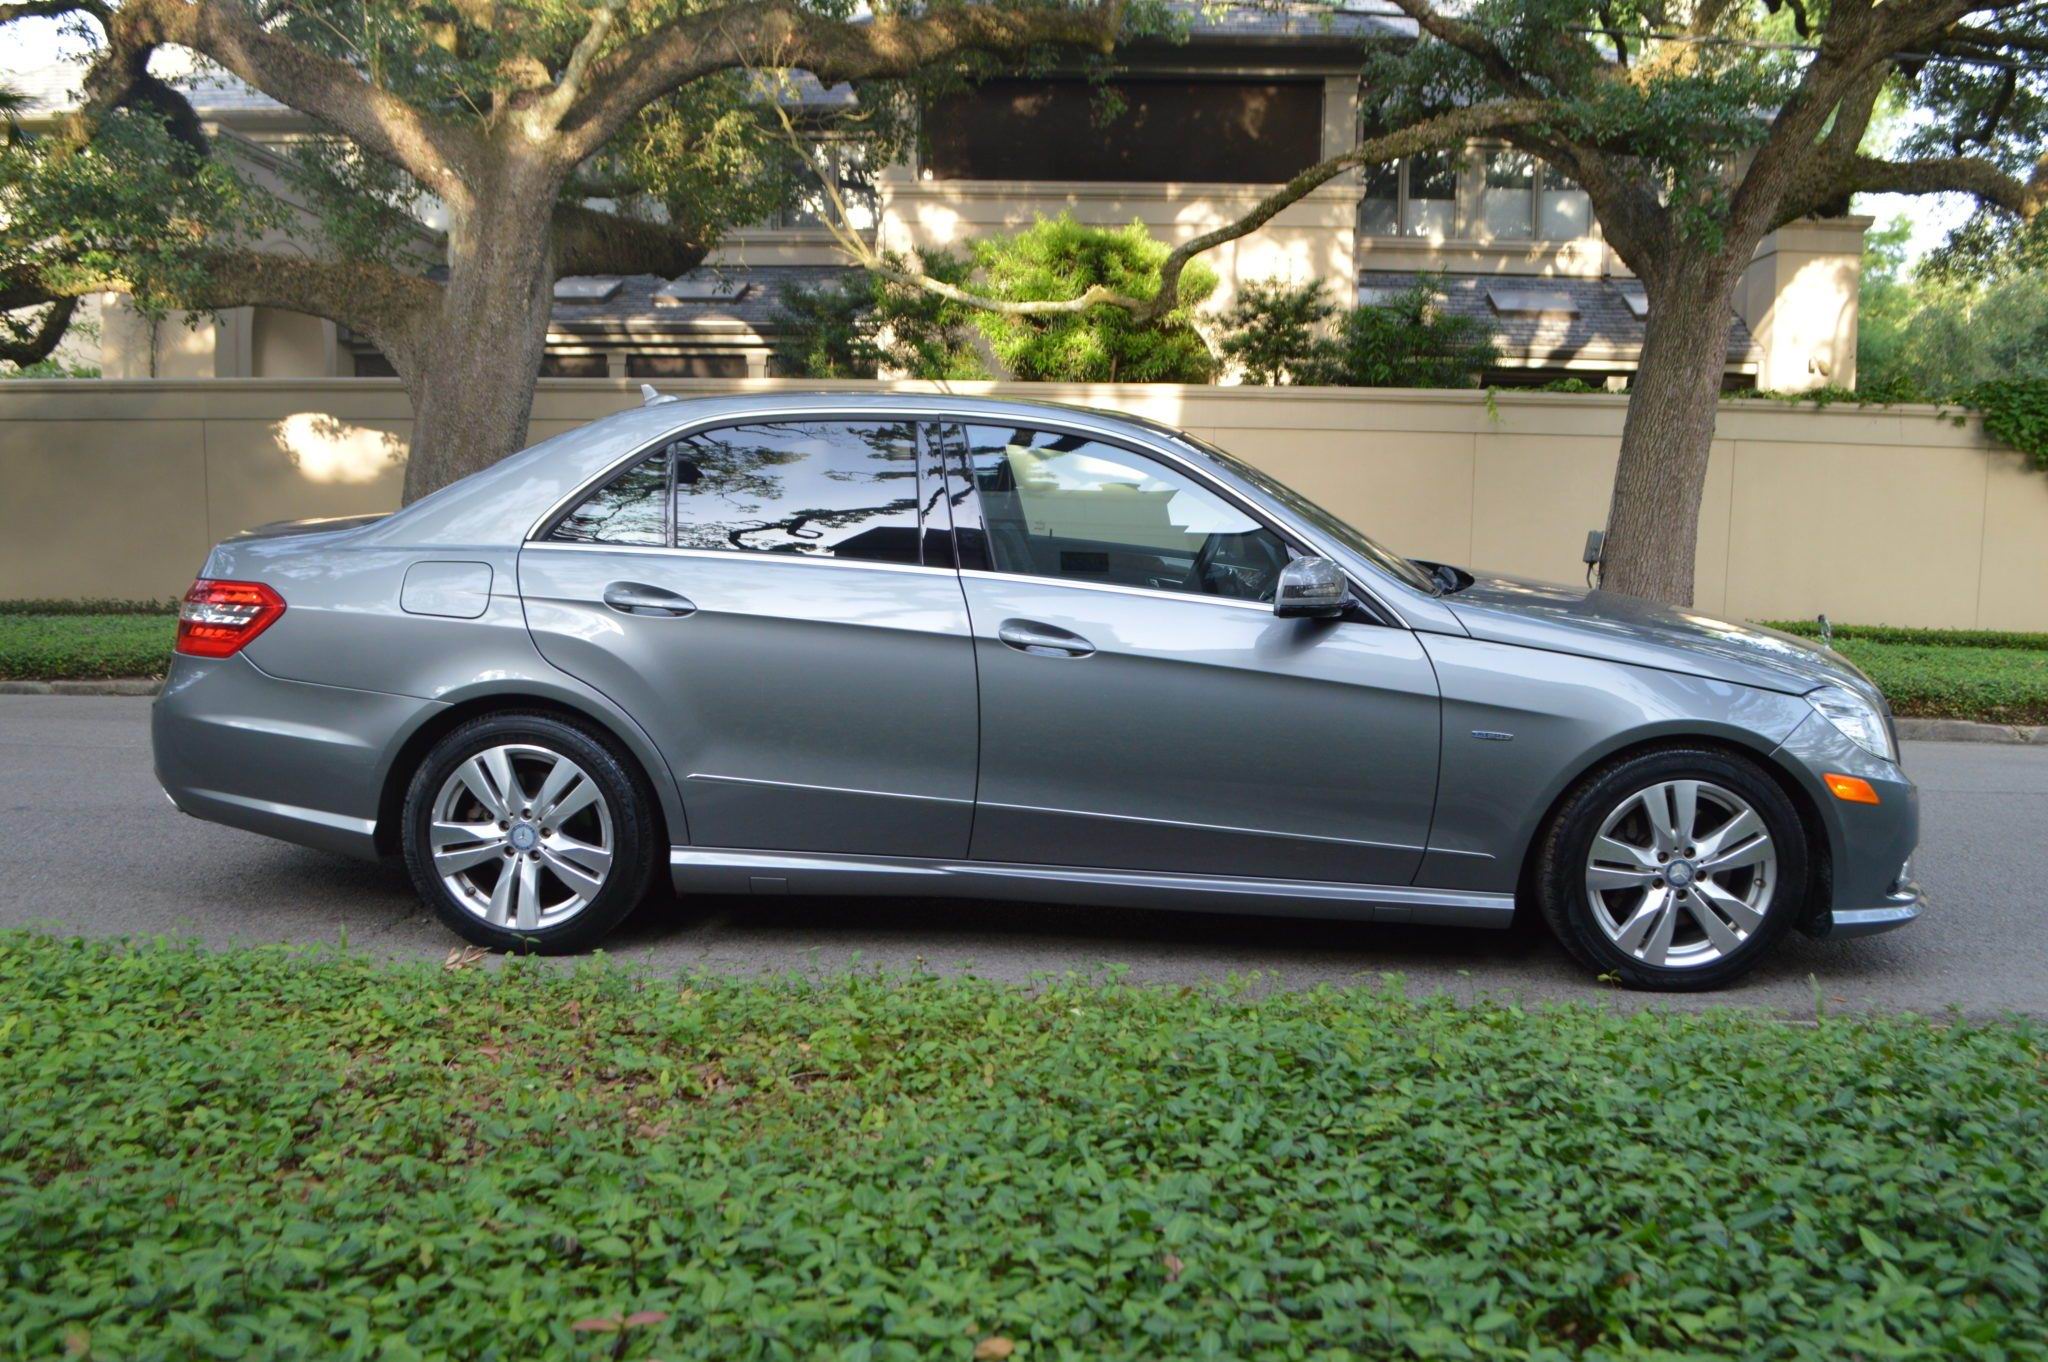 HD Mercedes Benz E350 Android Images